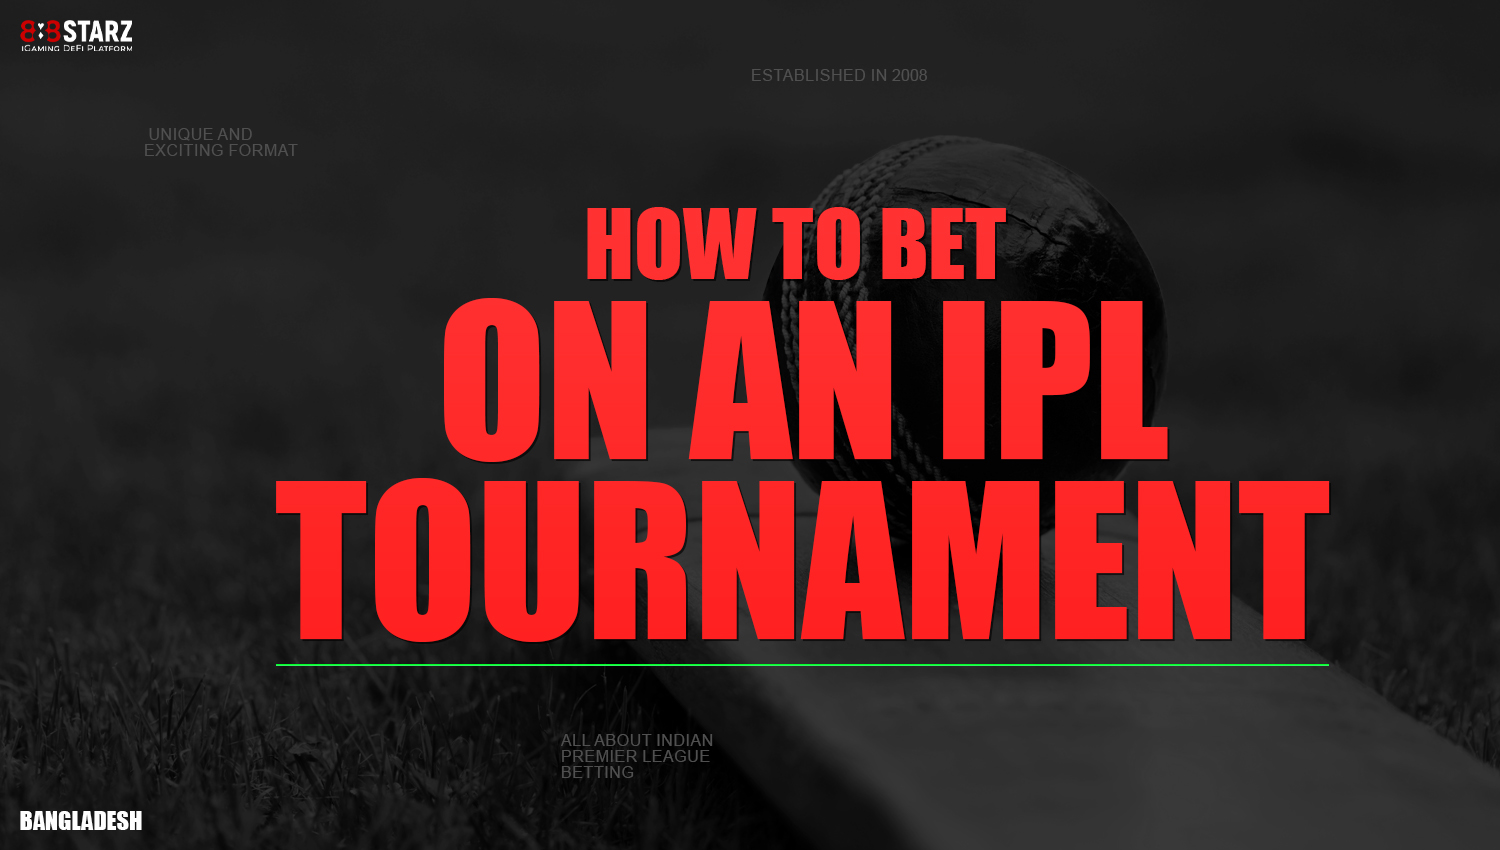 Instructions on how to start betting on IPL at 888starz